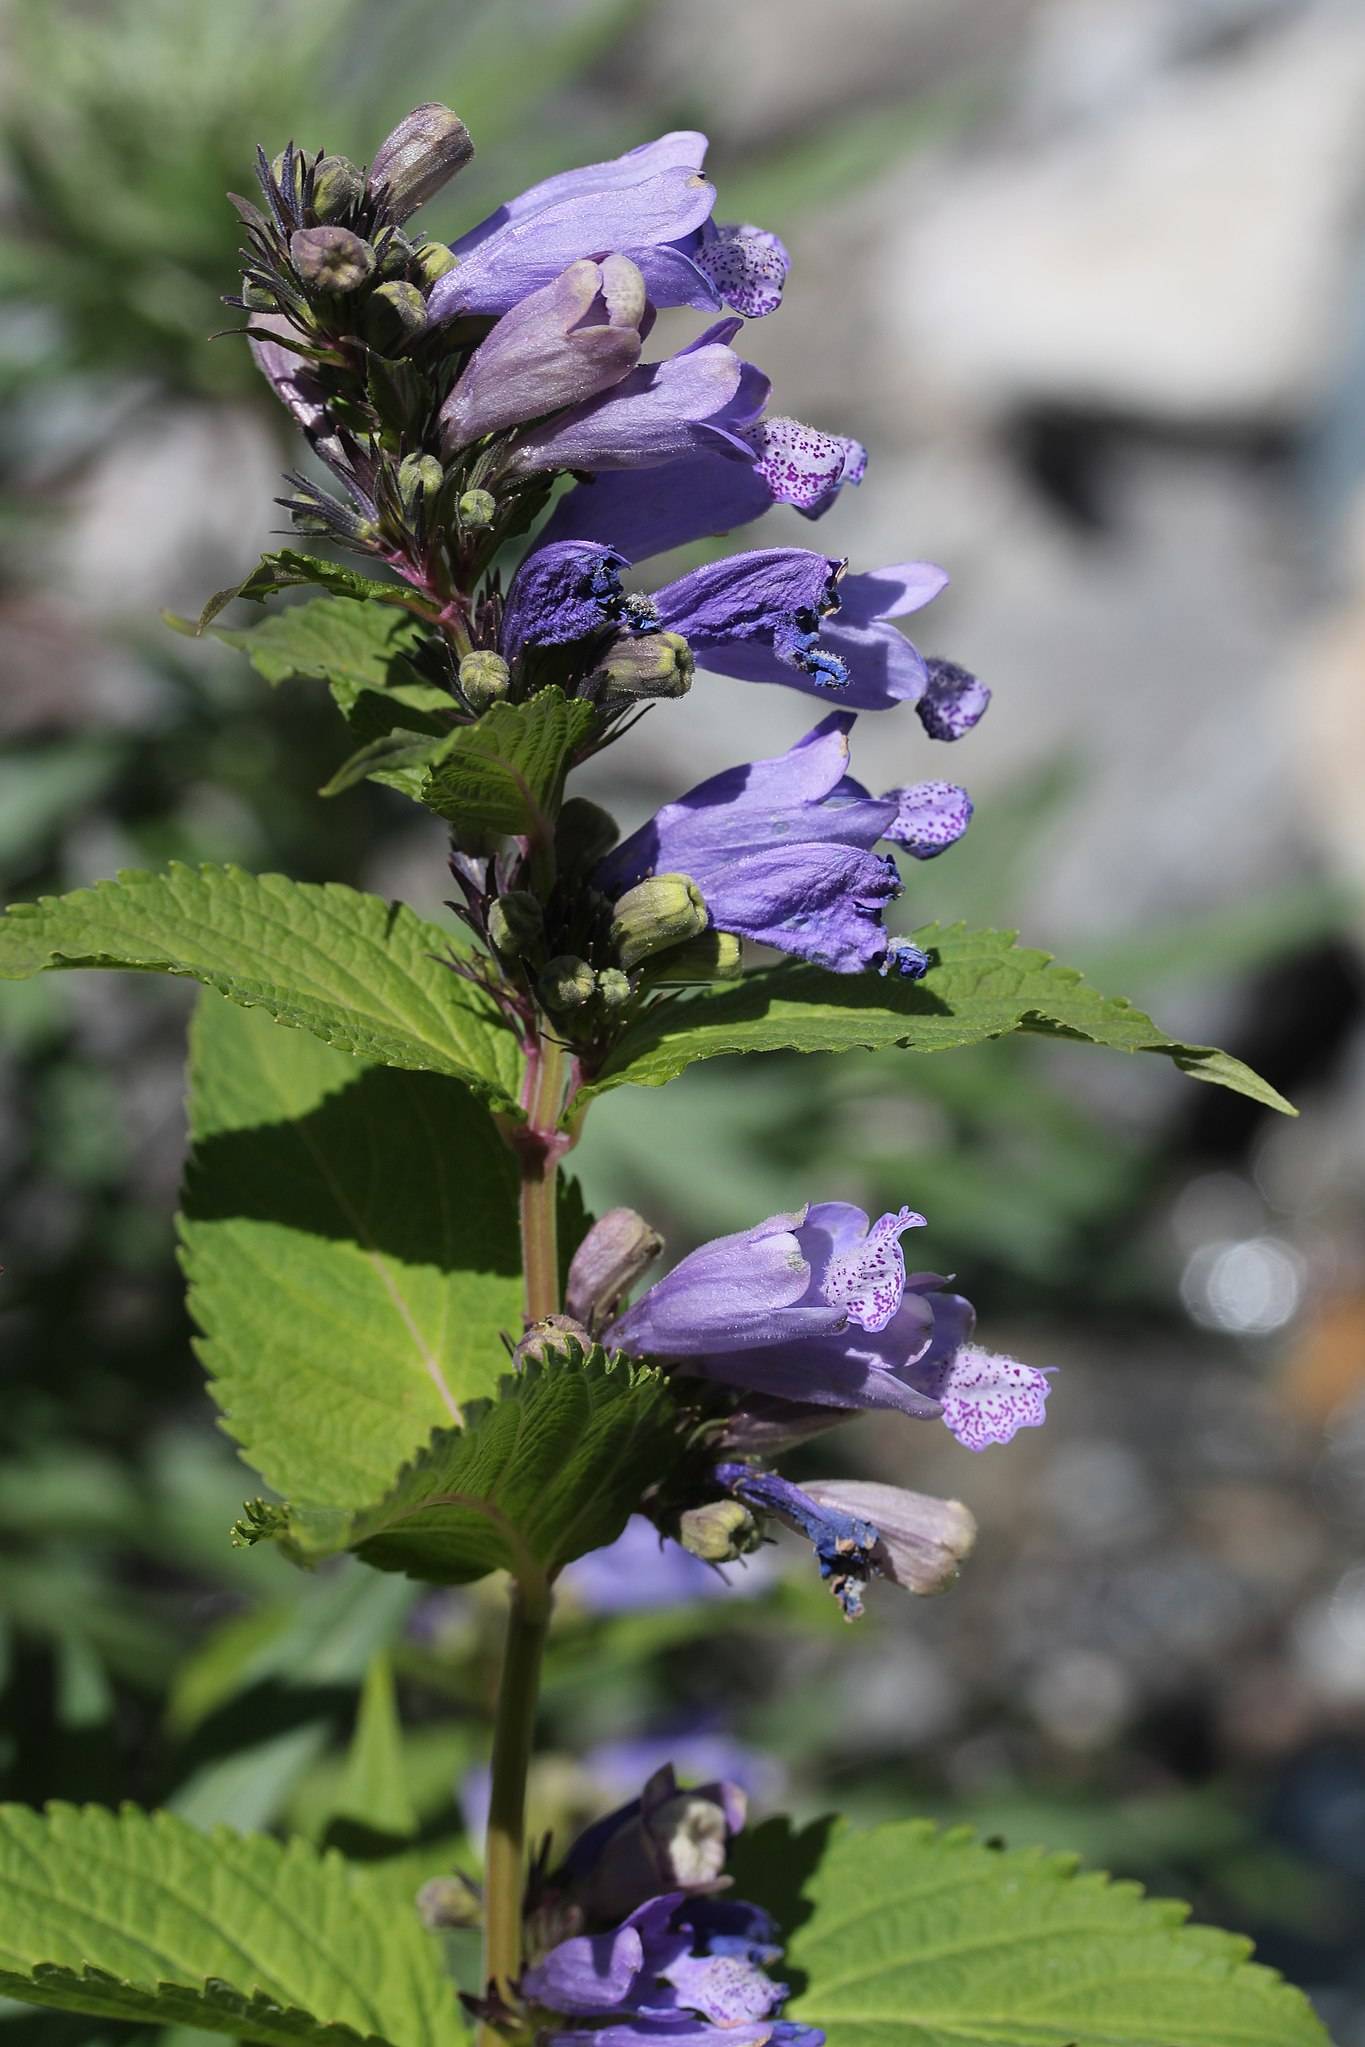 blue-purple flowers with green-purple buds, lime-green leaves and brown-green stems